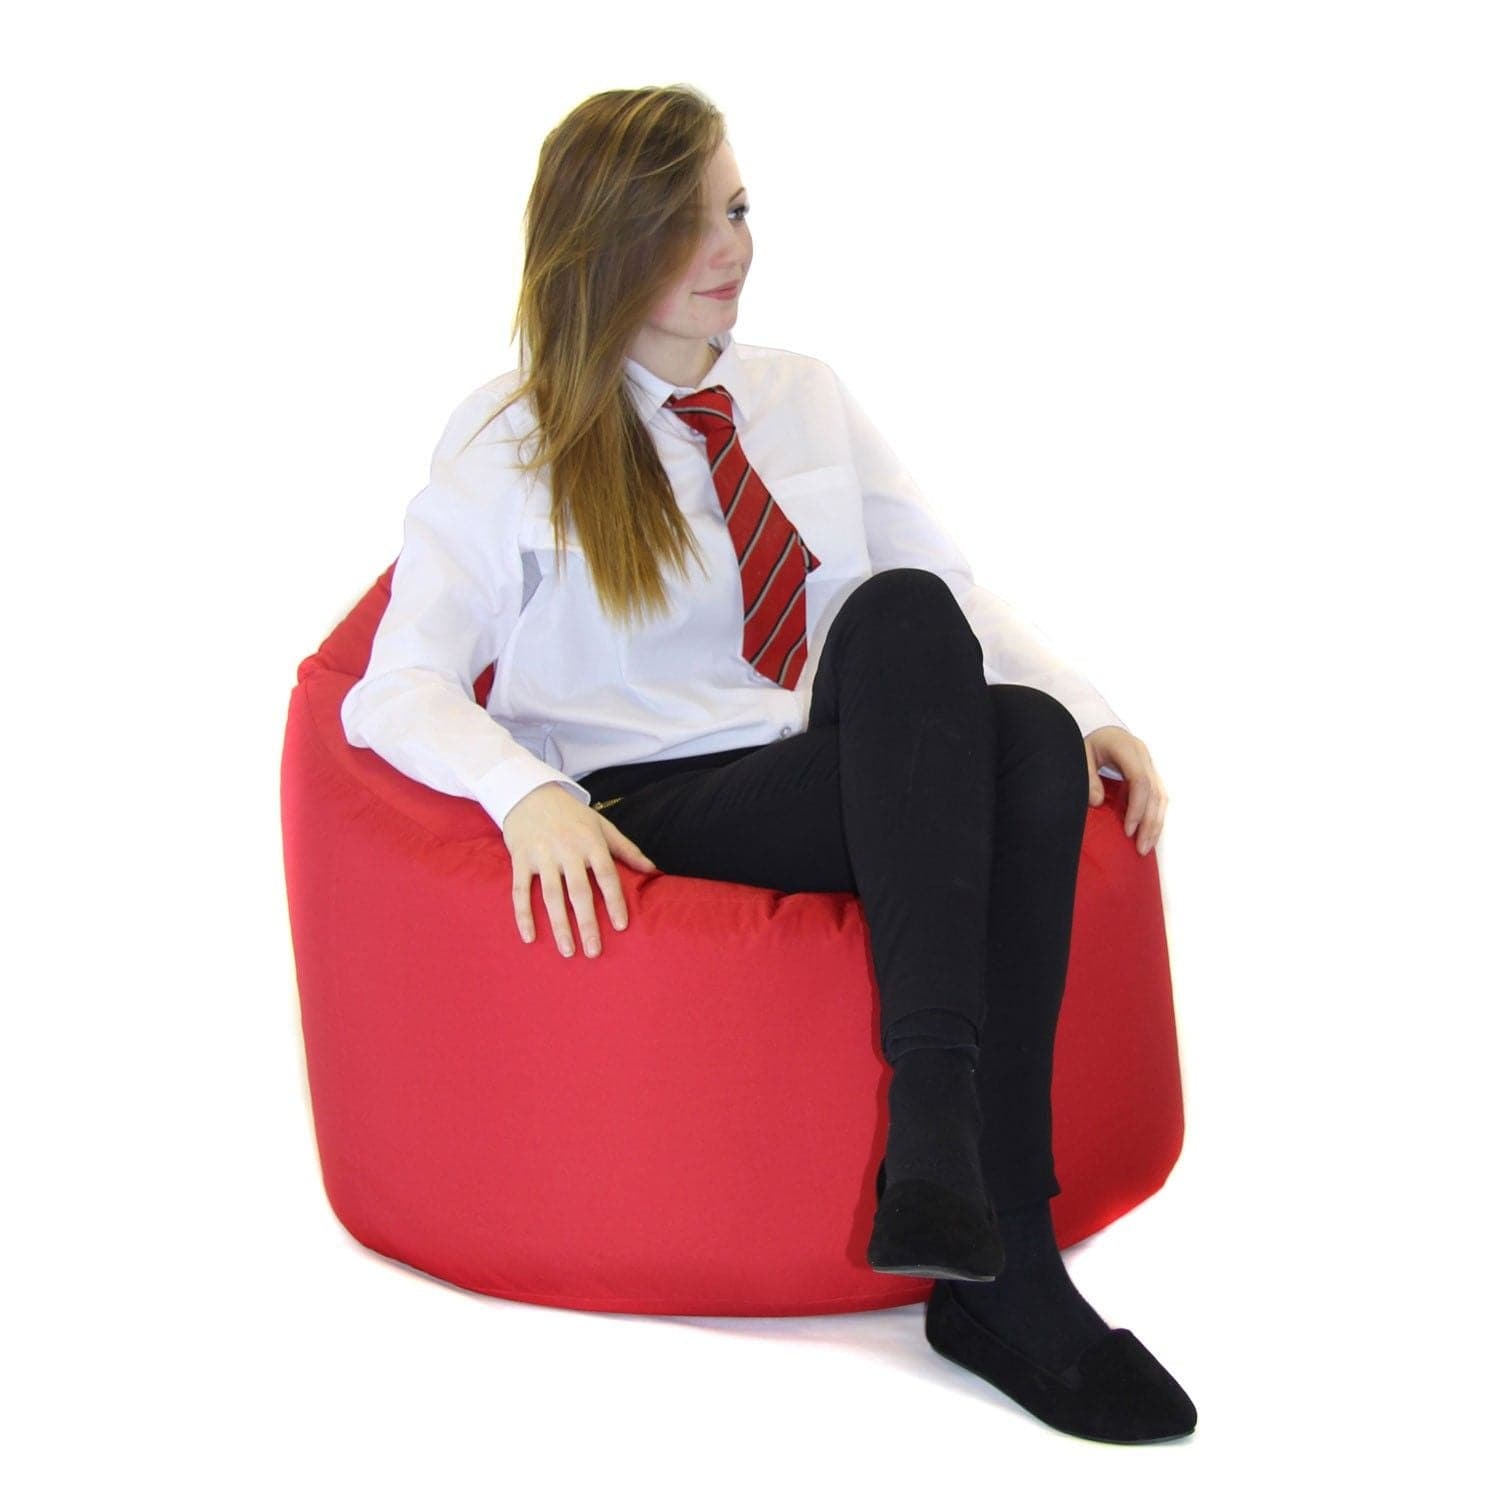 Teenage Bean Bag Chair, The Teenage bean bag supportive, structured bean bag, this is the perfect design for teenagers using laptops or reading for long periods of time.The Teenage Bean Bag is designed with relaxing study in mind. The Teenage Bag Cool, comfortable and light.The Teenage Bean Bag is easy to move around to form group or solo study areas. The Teenage Bean Bag Indoor/Outdoor bean bags are made from a soft, shower-proof and UV Resistant material - meaning the sun and rain won't damage them! Altho